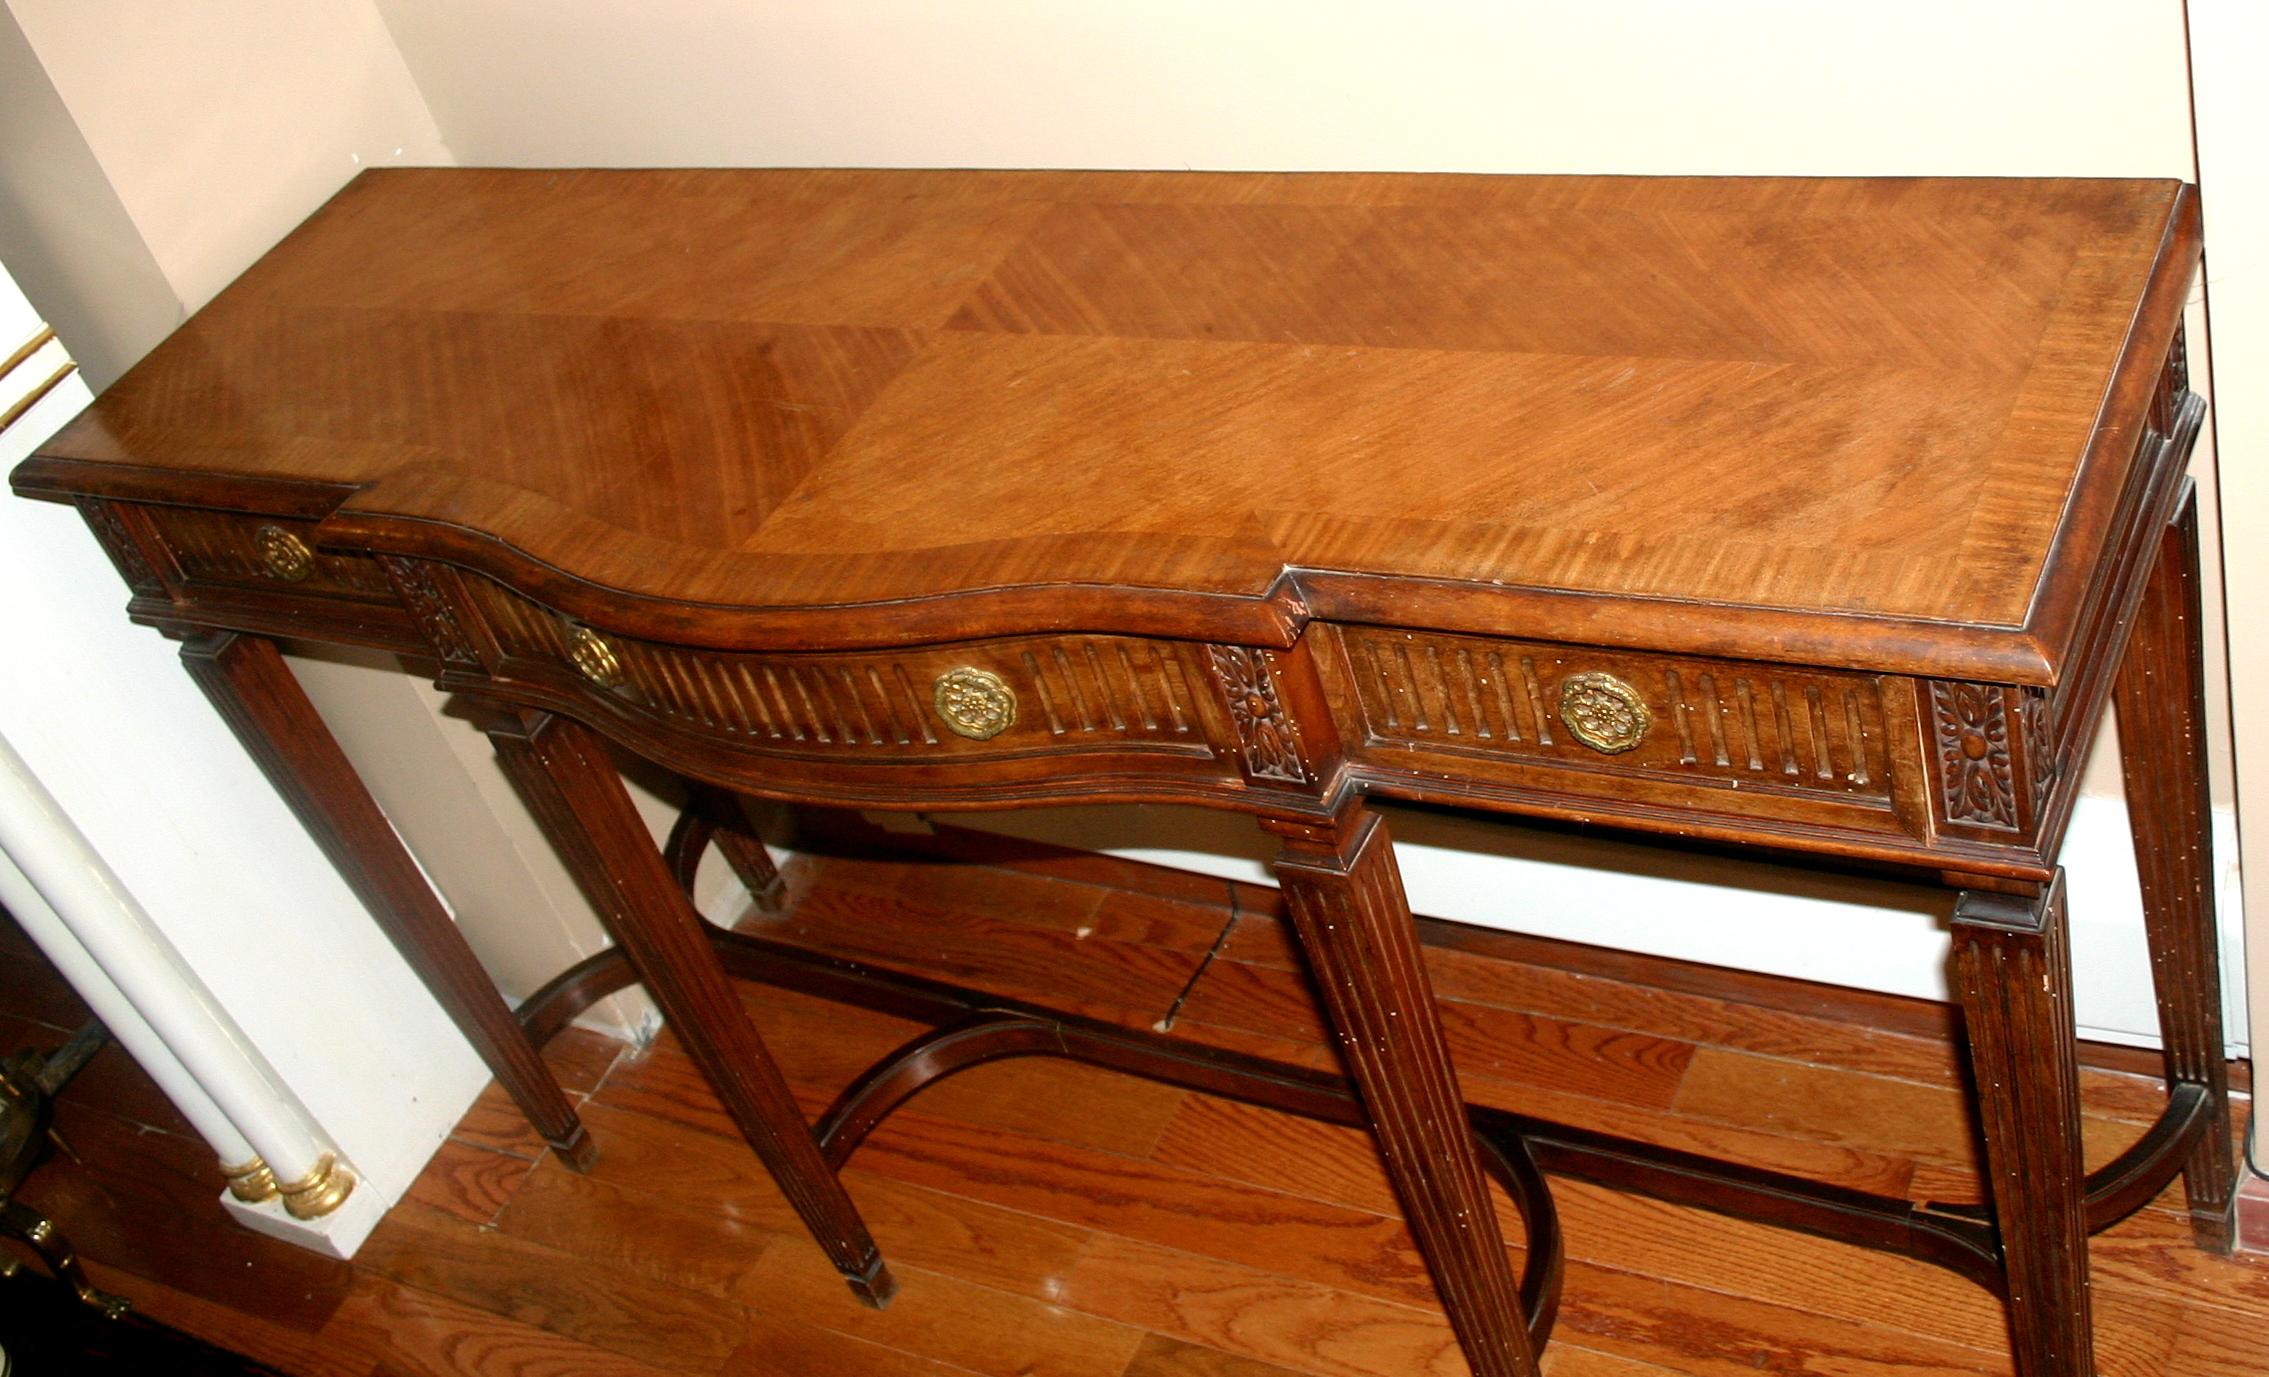 Circa 1900 French Louis XVI style console table.

Measurements:
Length: 63